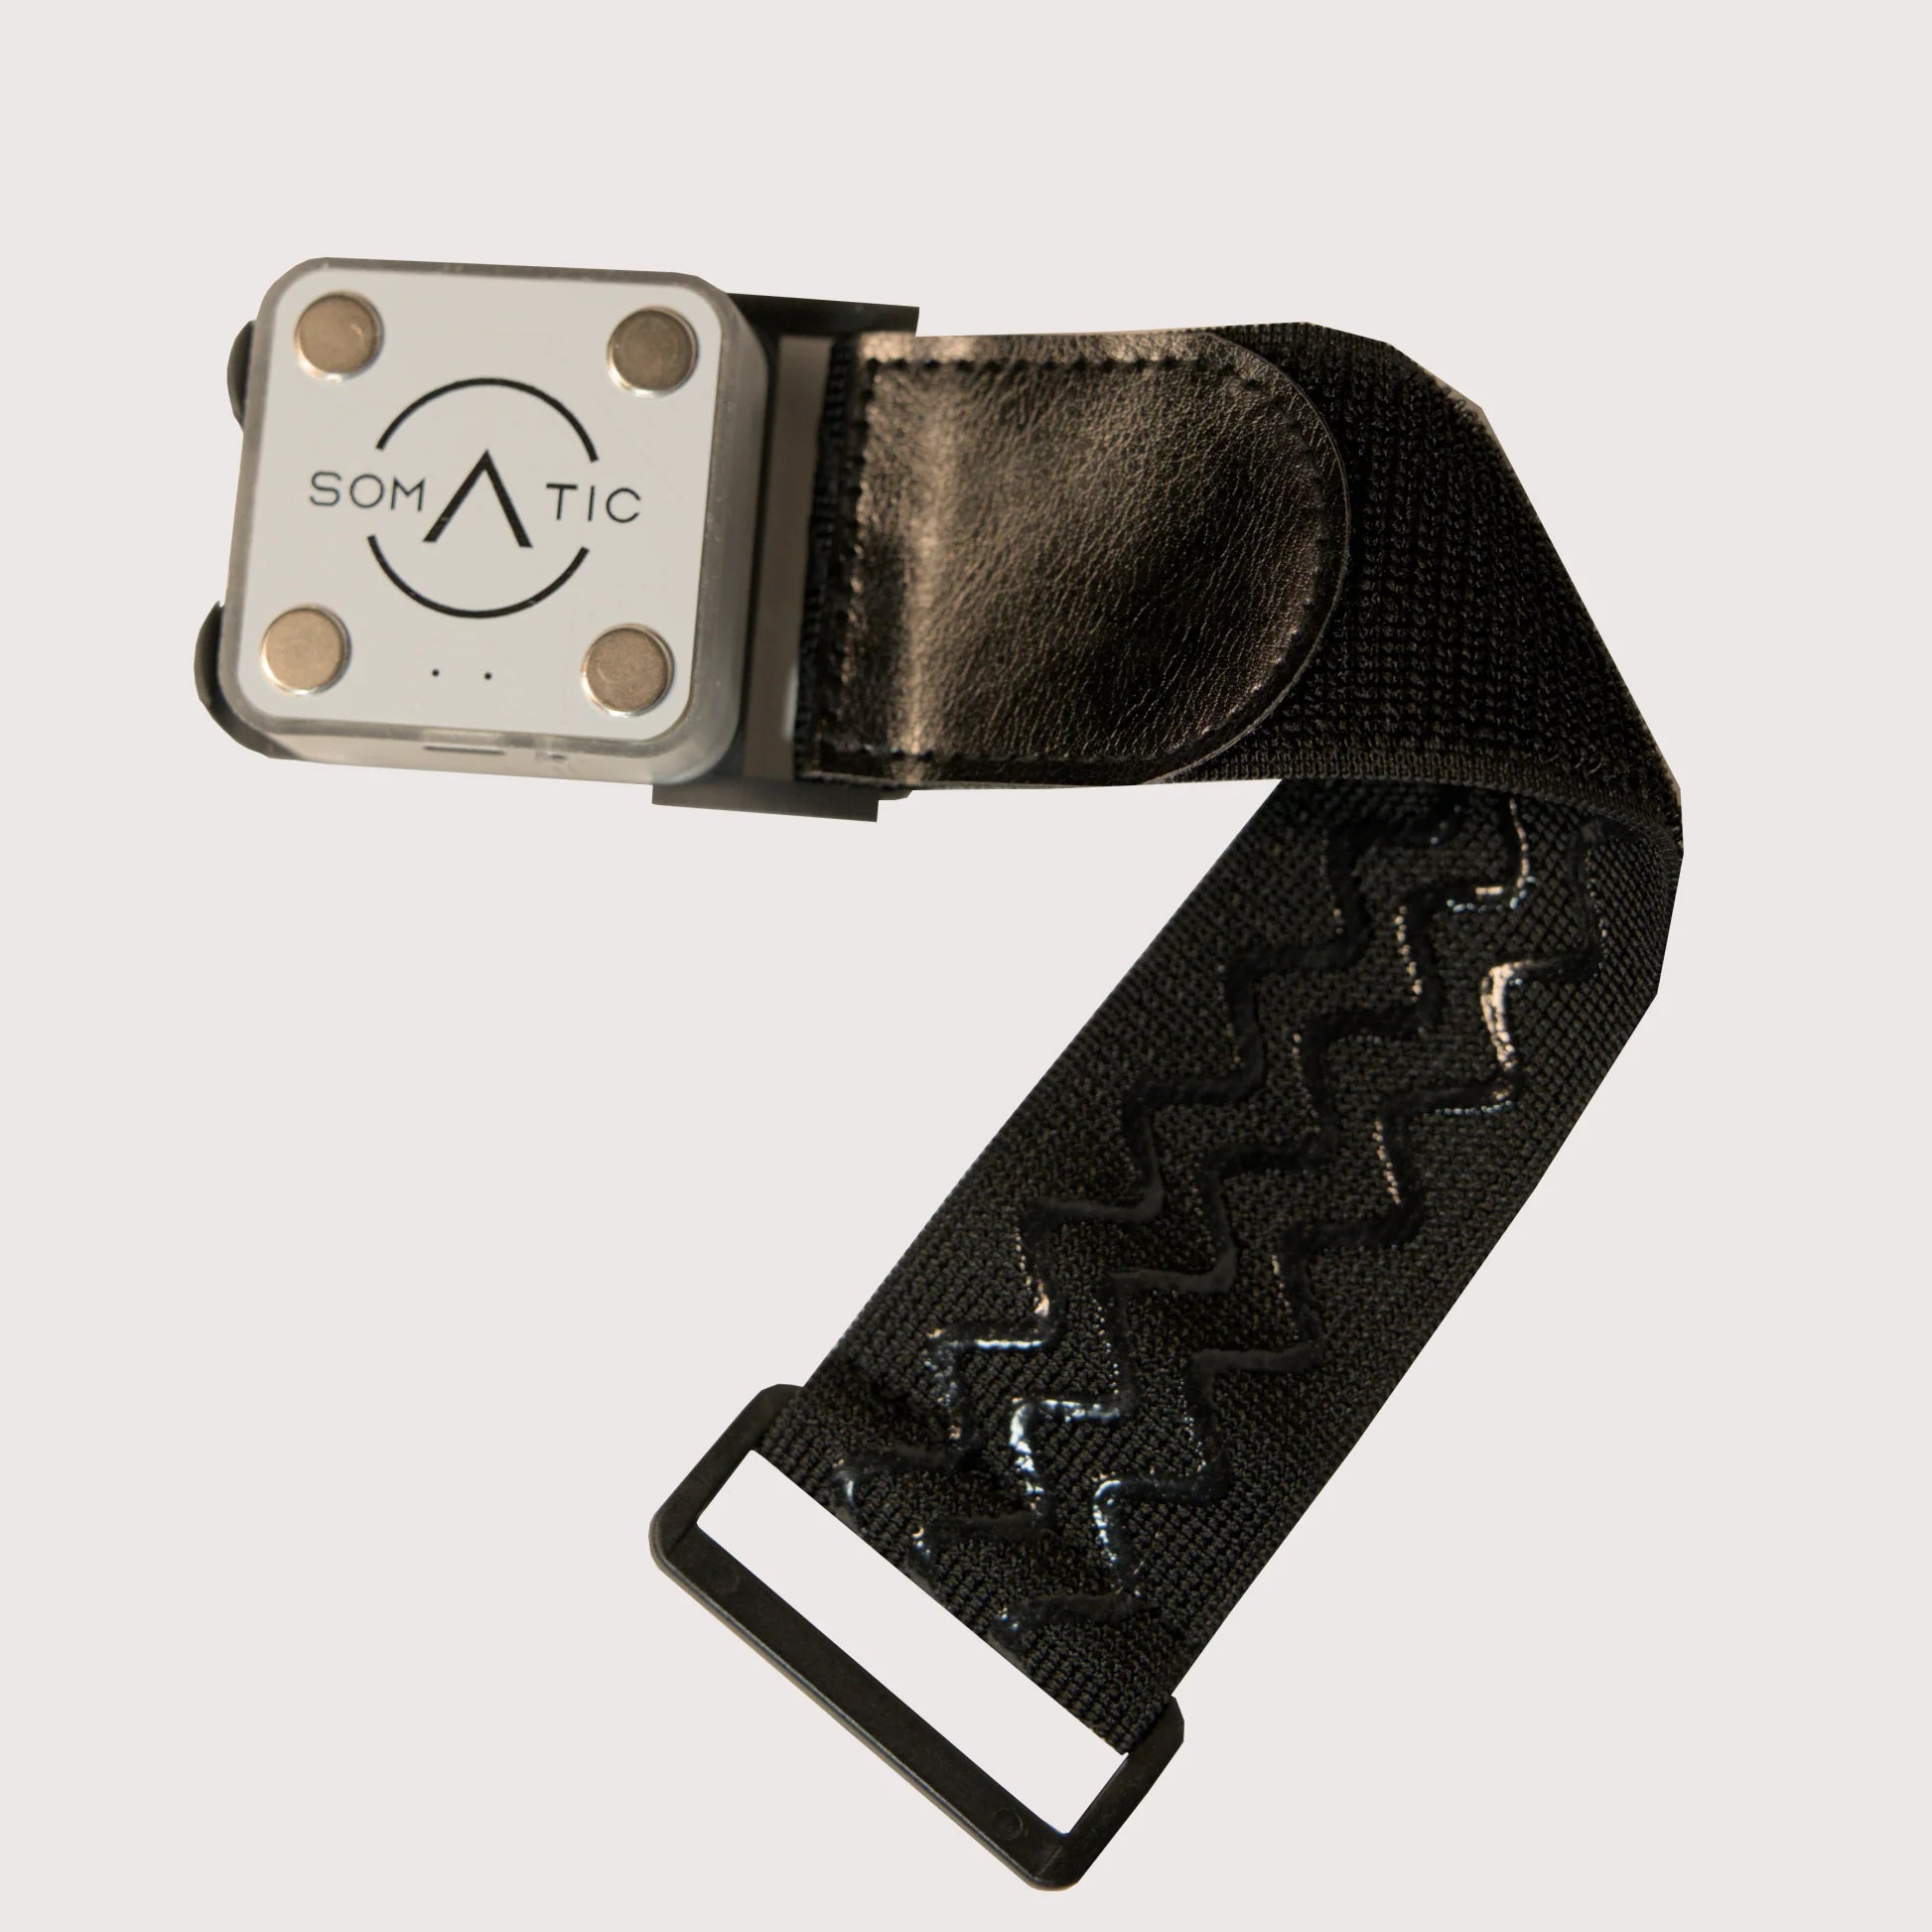 This small strap includes the plastic strap adapter that serves as the anchor point for the EROS Tracker to connect magnetically.